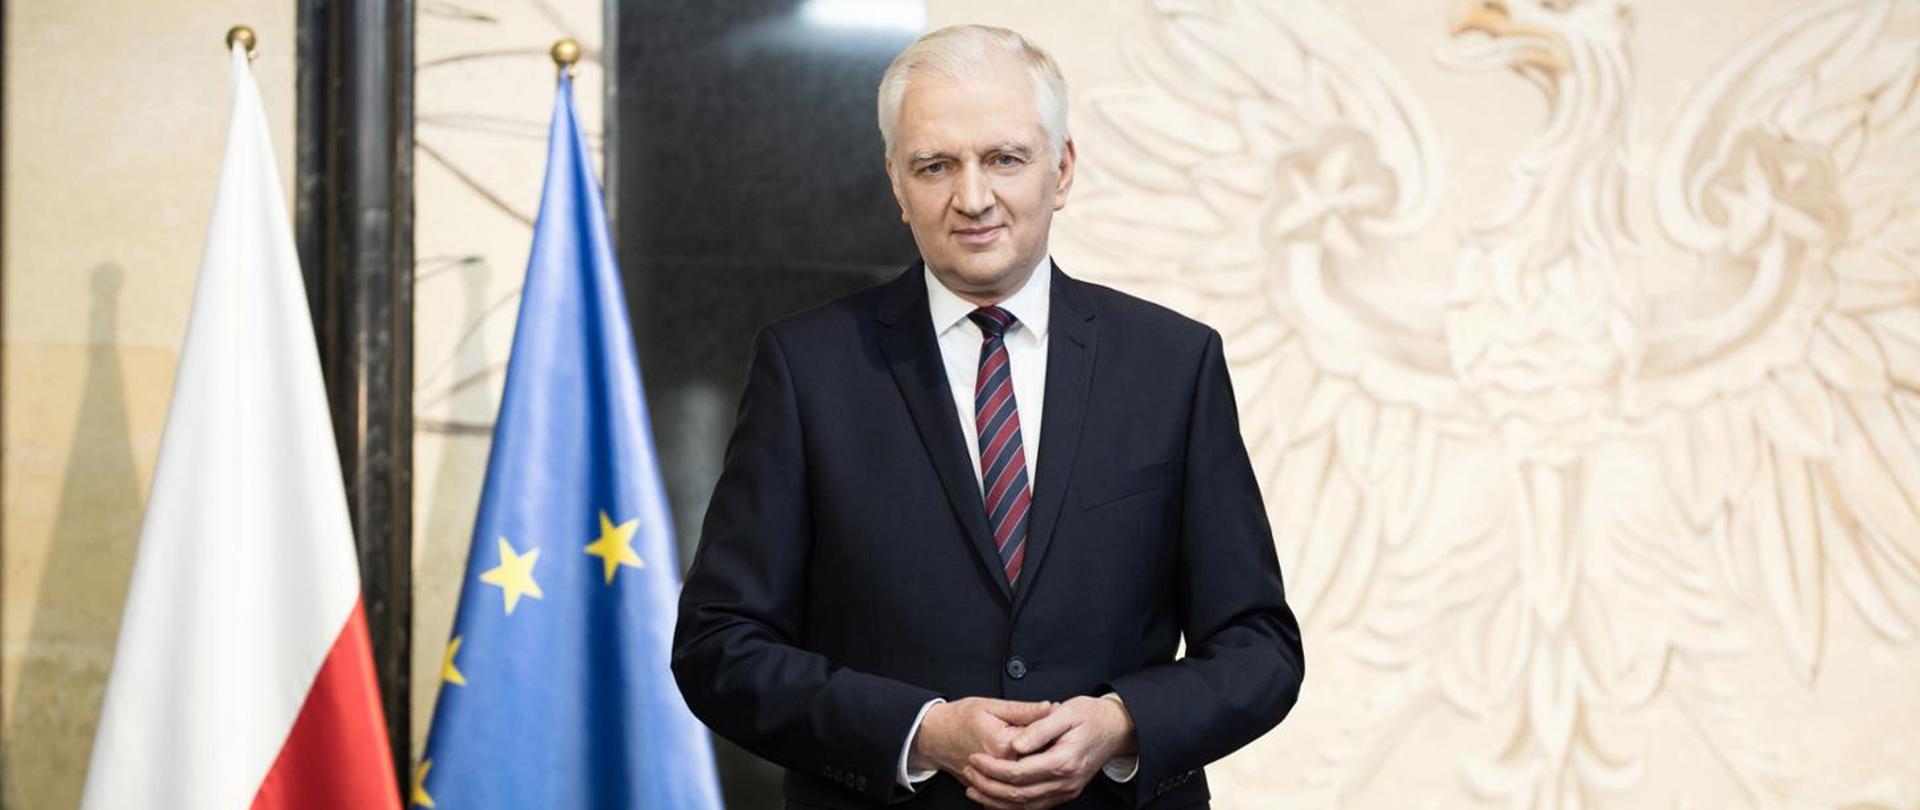 Prime Minister Jarosław Gowin by the Poland and EU flags